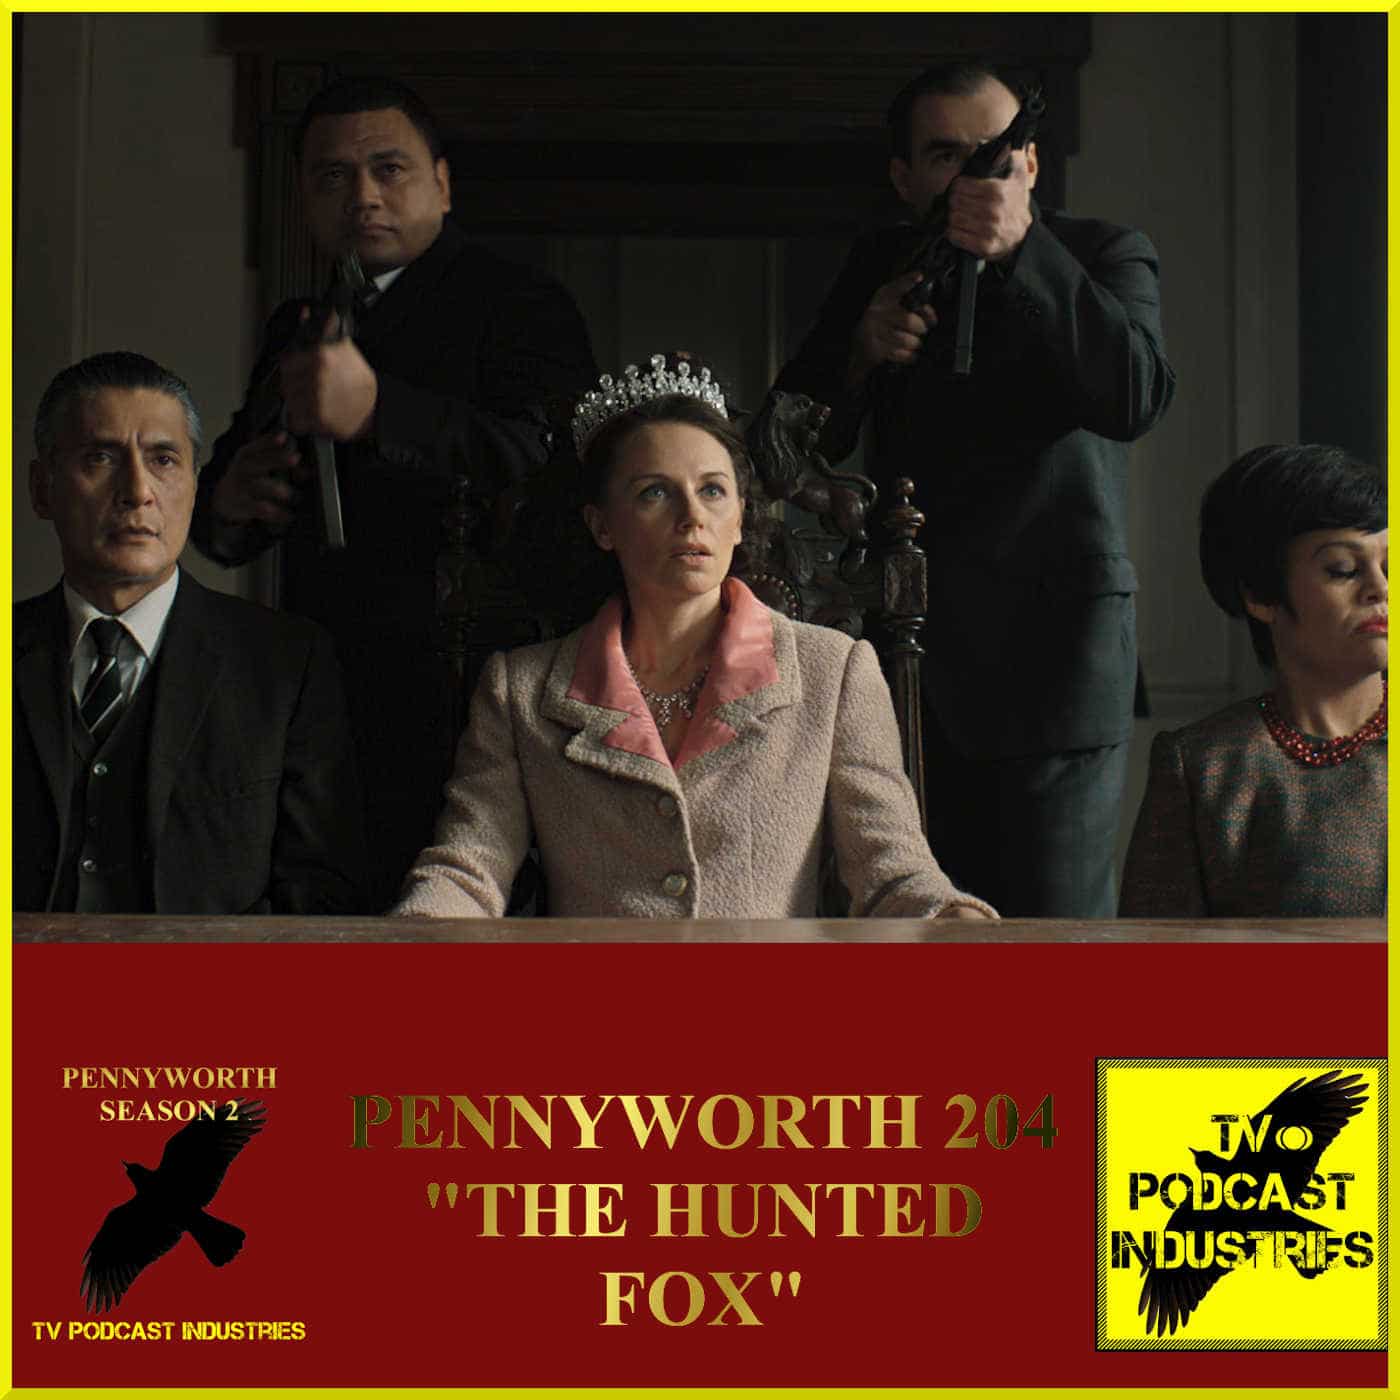 Pennyworth Season 2 Episode 4 "The Hunted Fox" Podcast by TV Podcast Industries